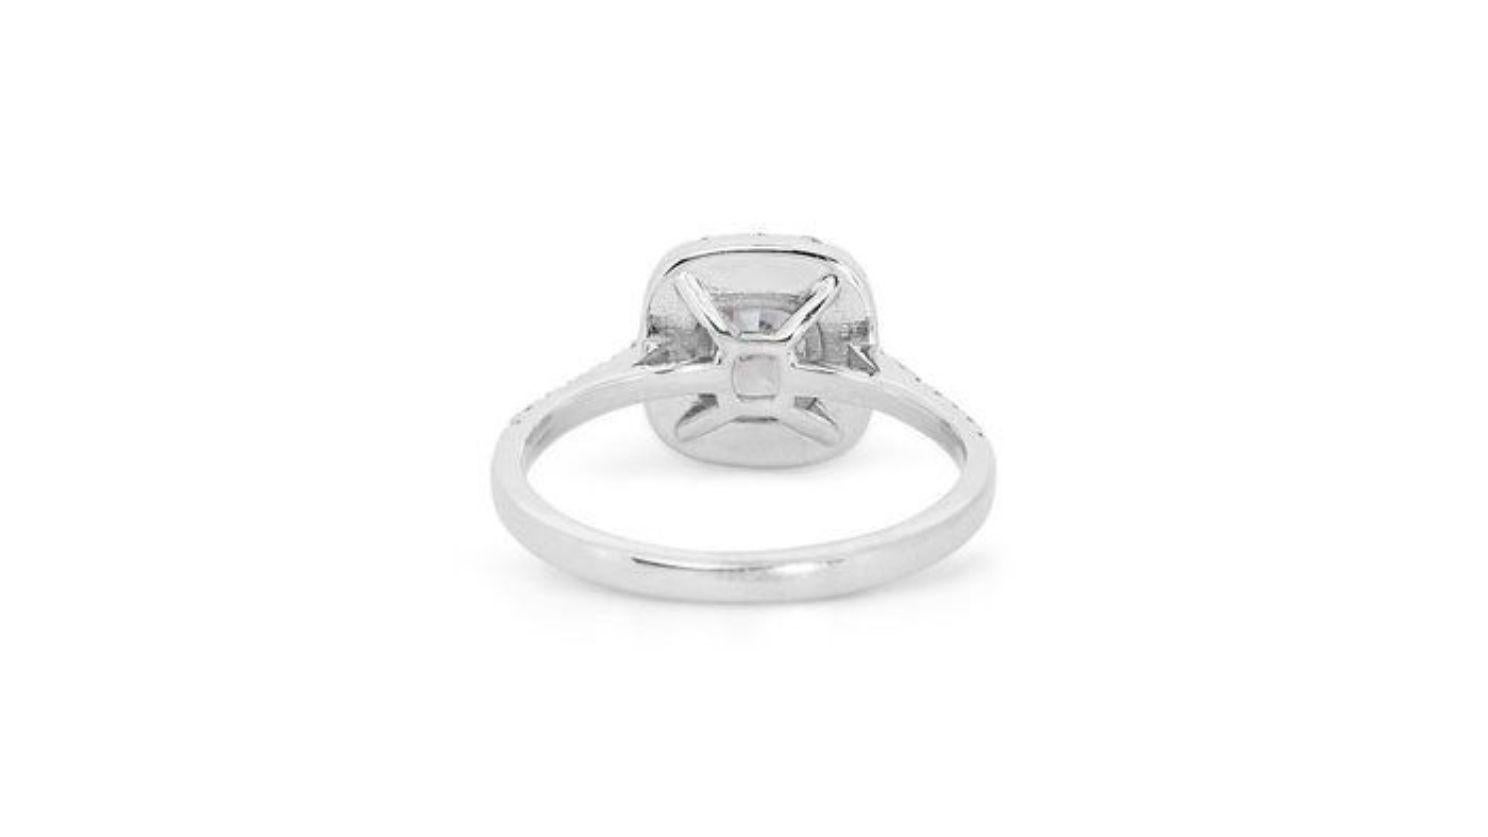 Exquisite 1.47ct Cushion Cut Diamond Ring set in 18K White Gold For Sale 1